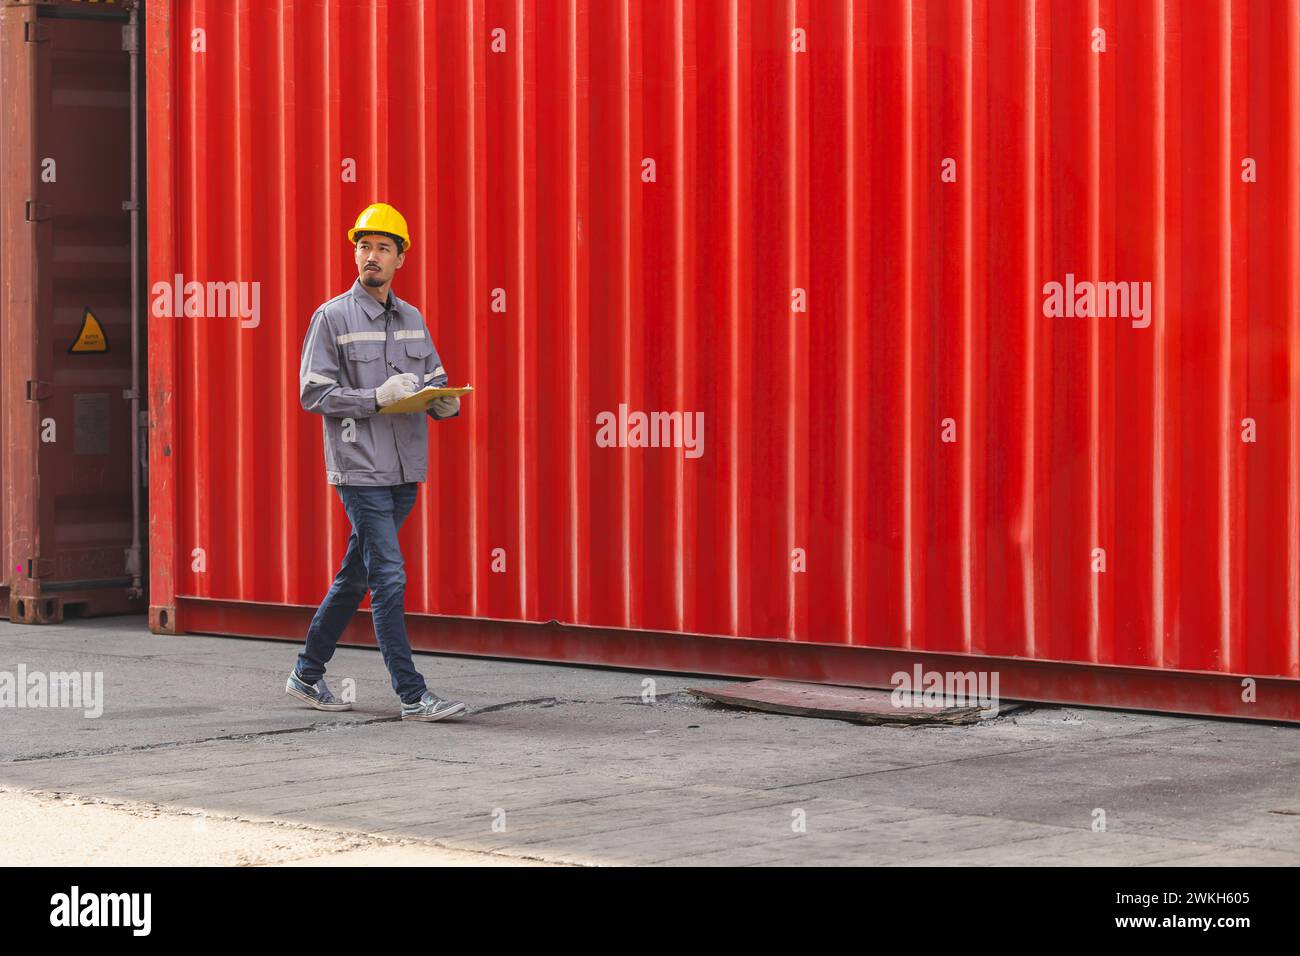 Cargo container yard working staff walk check looking for import export customs service team officer Stock Photo